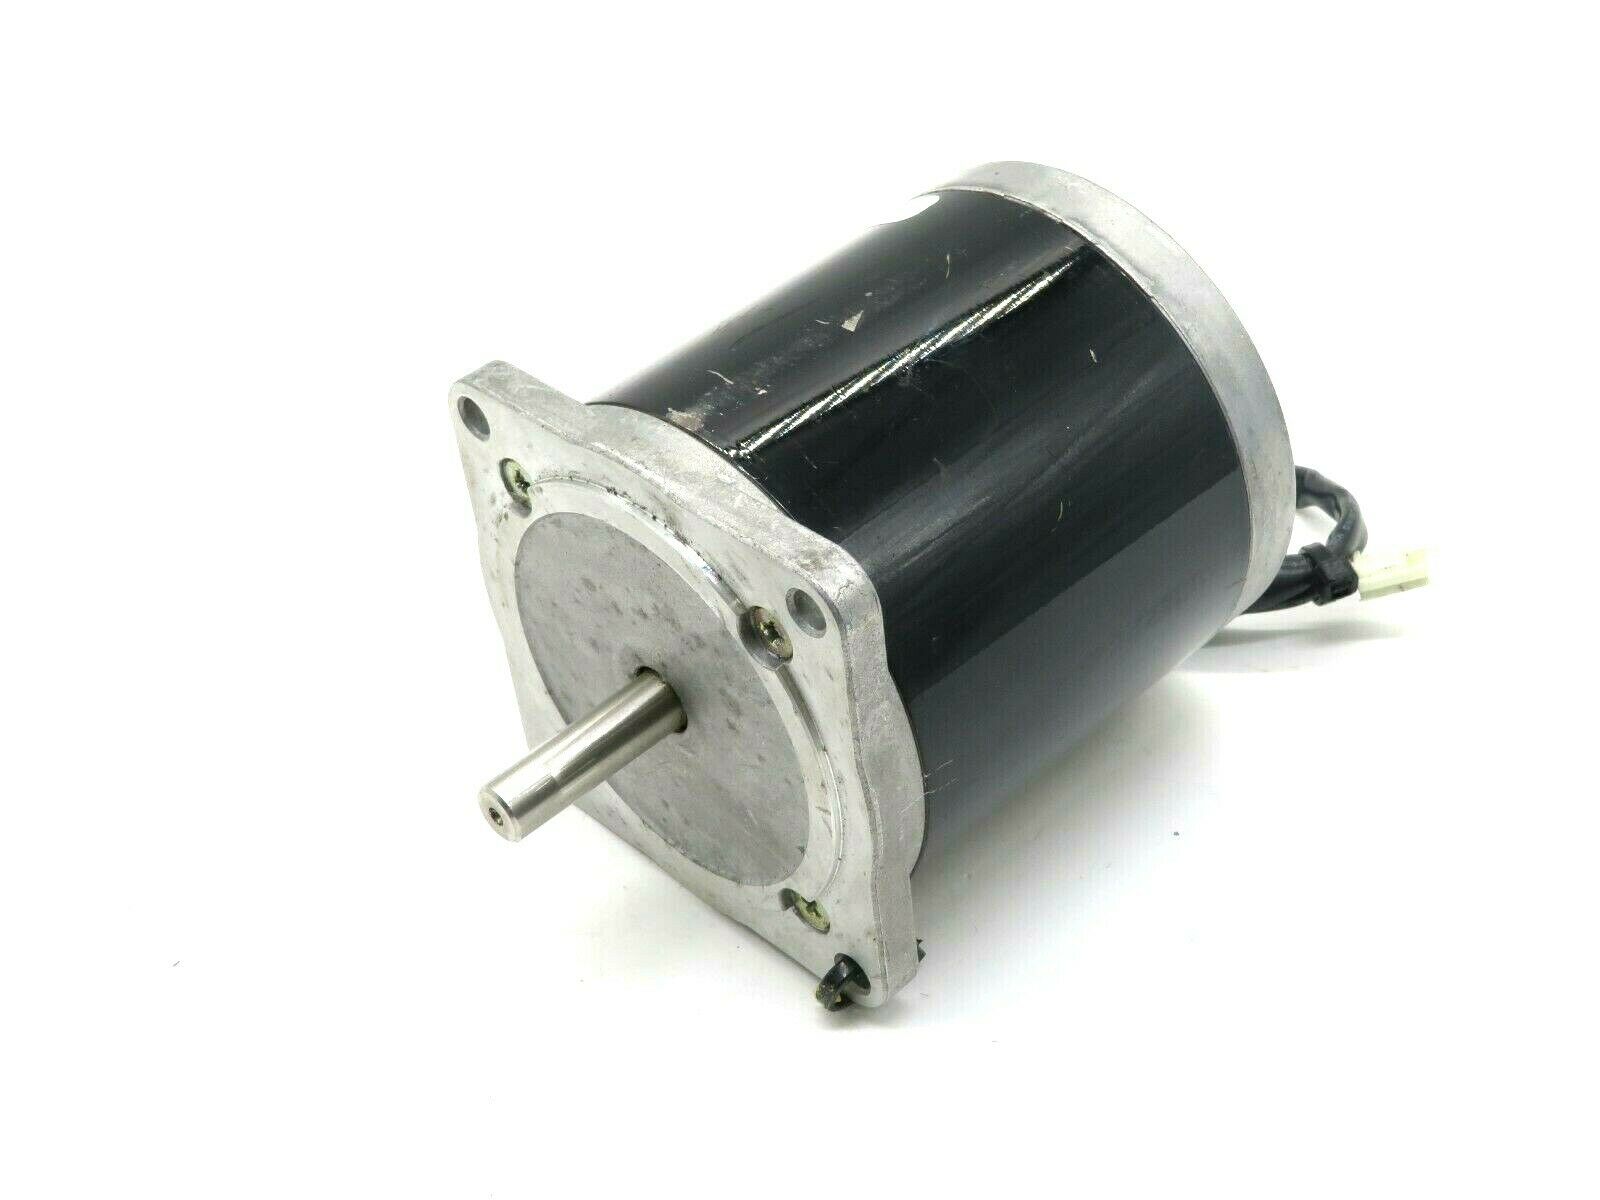 NEW ORIENTAL MOTOR CO. A3945-9412 VEXTA STEPPING MOTOR 2 PHASE 